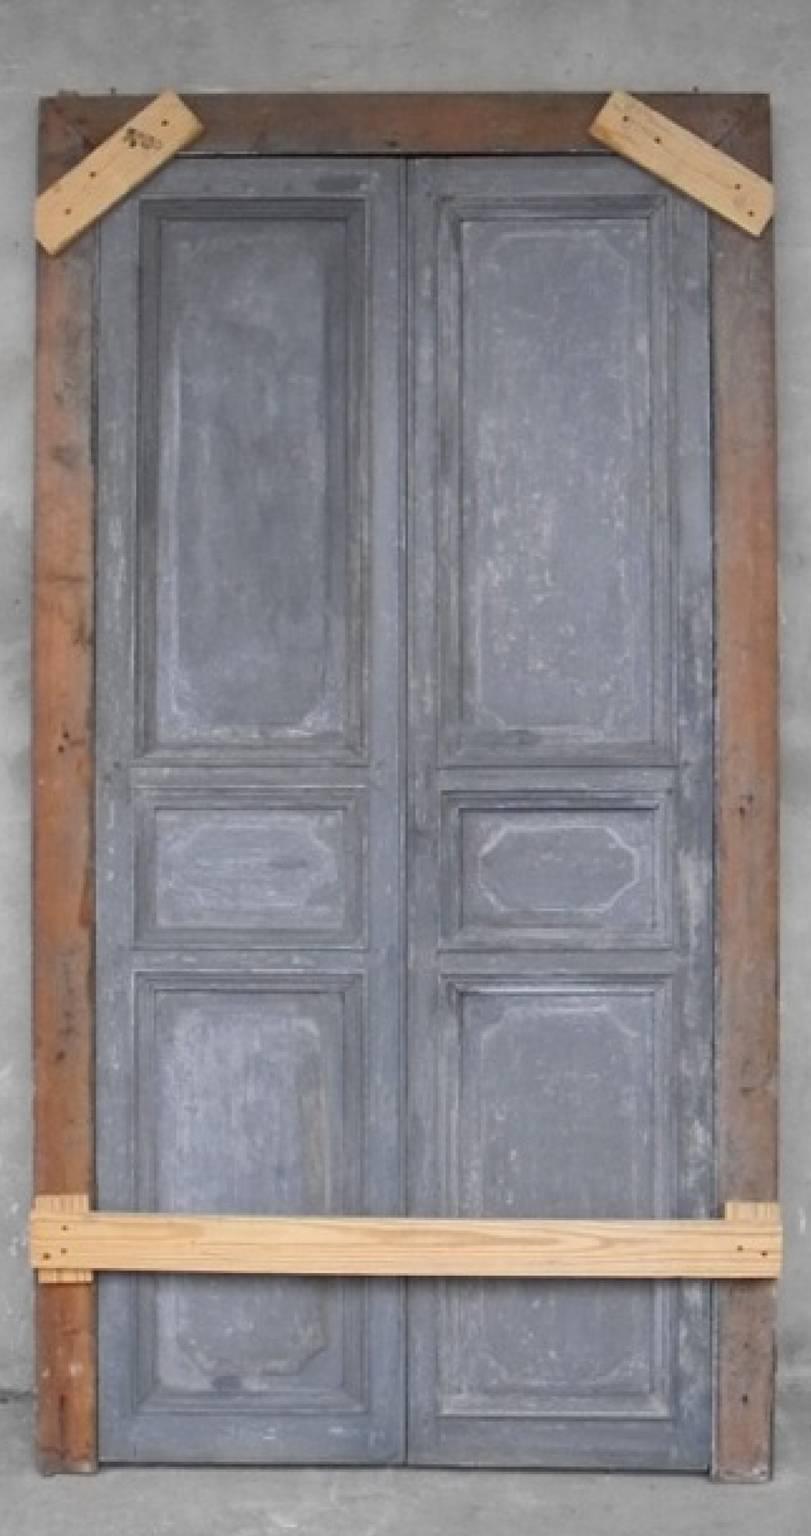 Pair of 18th century communication doors from a Bastide outside of Pezenas, France.